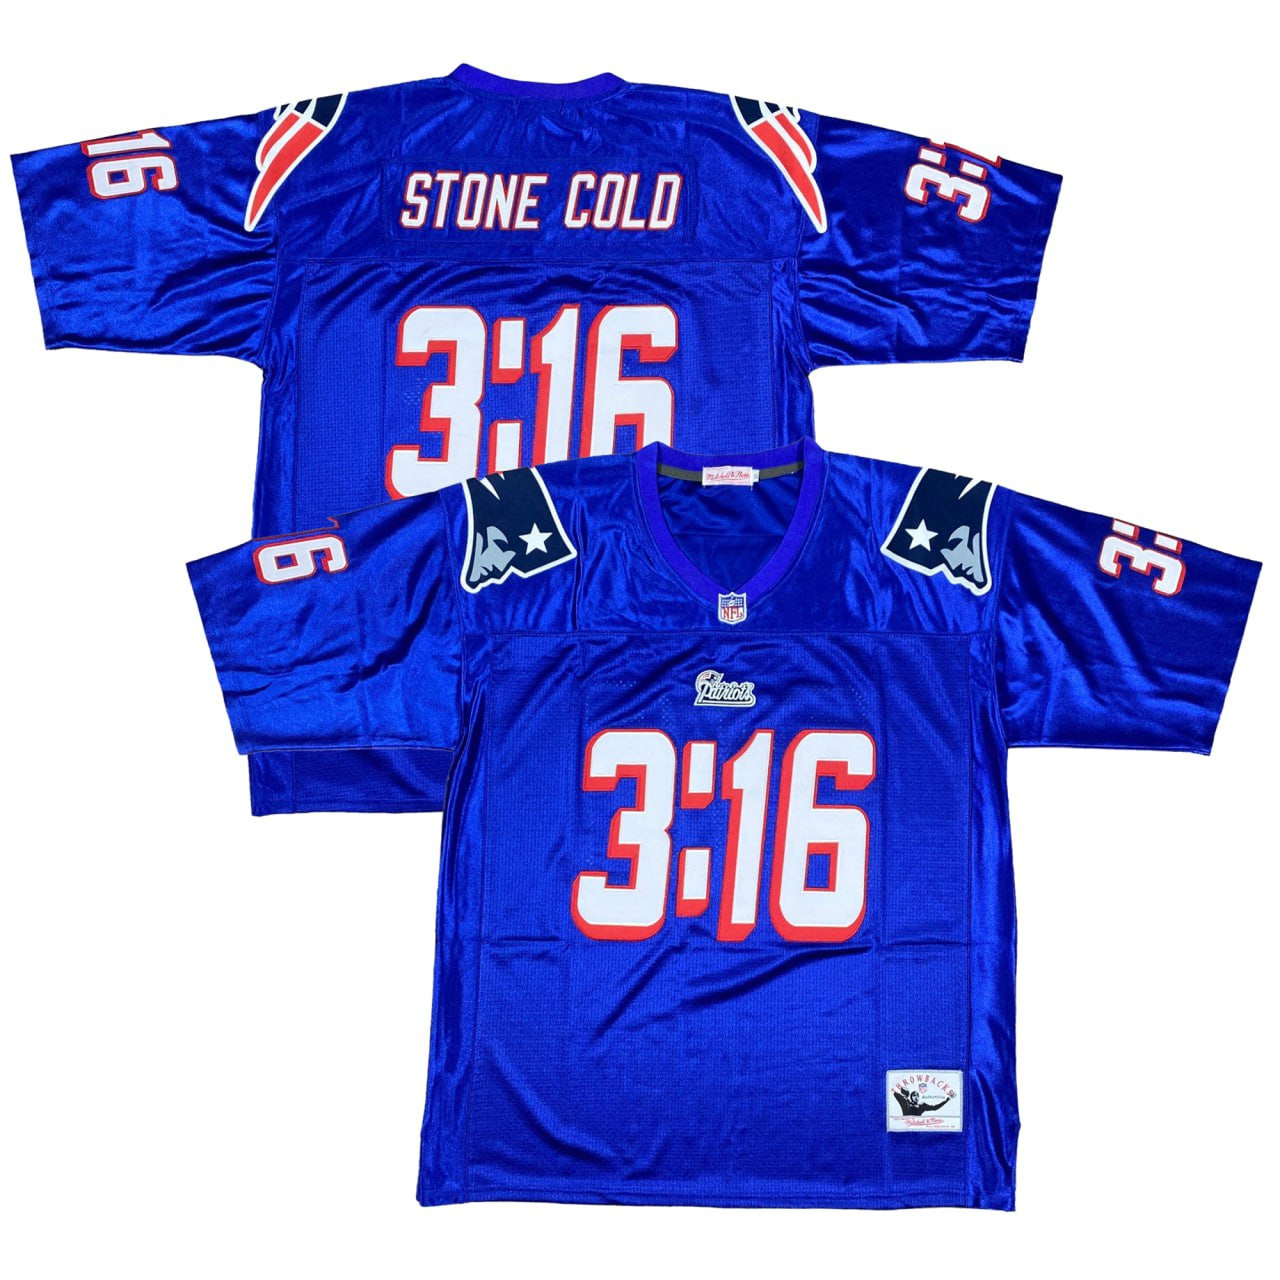 Stone Cold Steve Austin New England Patriots Jersey - All Stitched